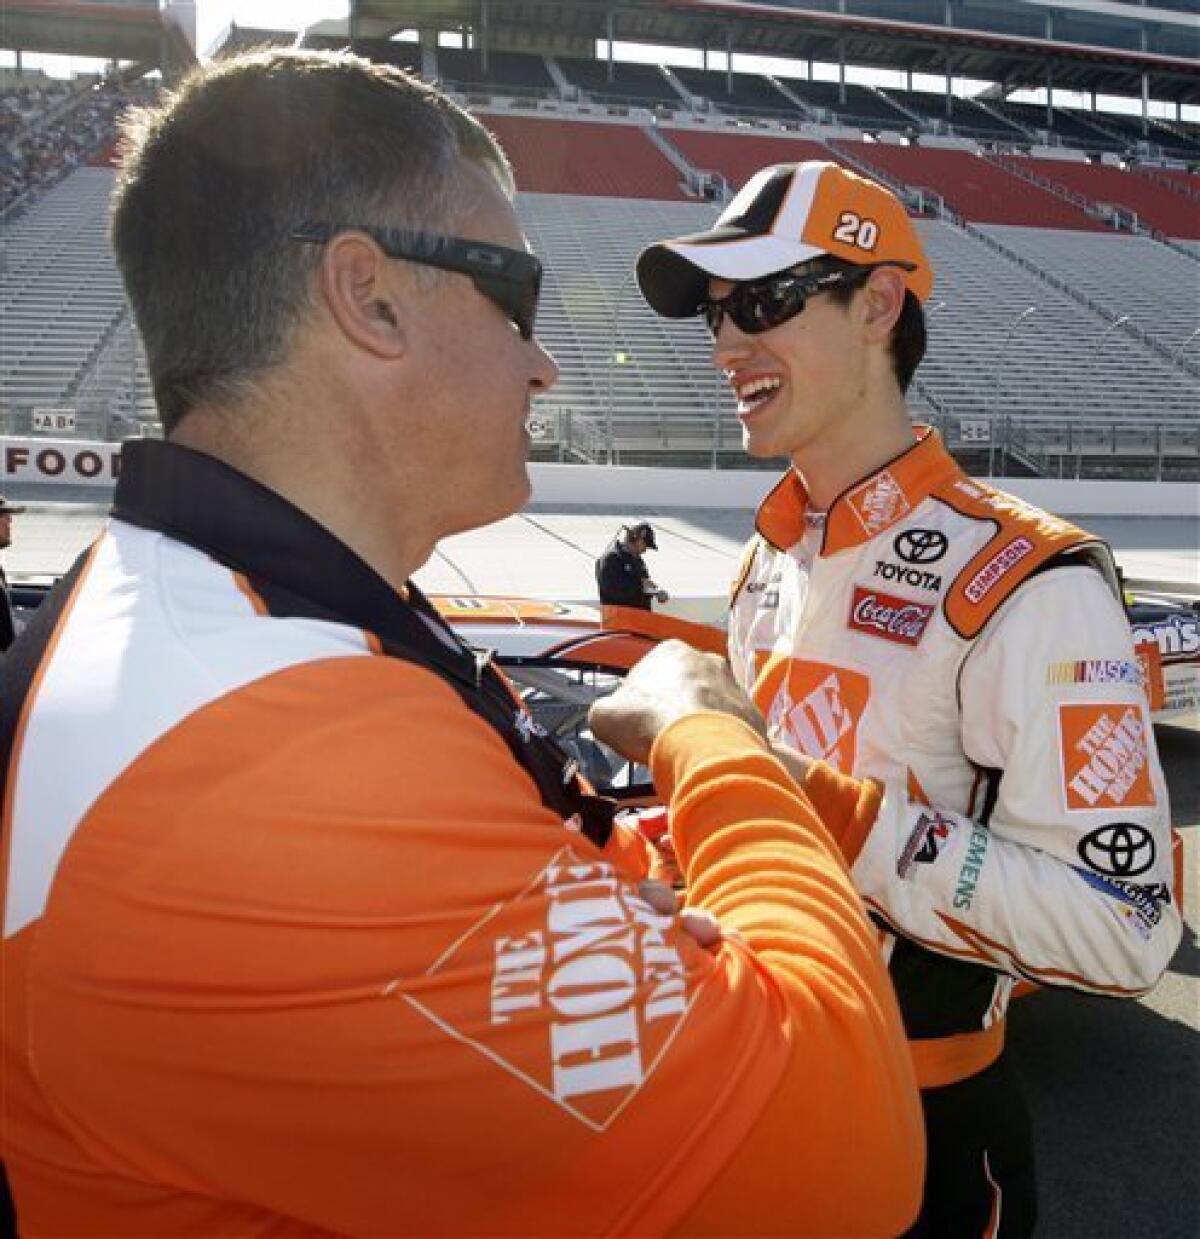 Joey Logano, right, is congratulated by a crew member after qualifying for the NASCAR Sprint Cup series Food City 500 auto race at Bristol Motor Speedway in Bristol, Tenn., Friday, March 19, 2010. Logano won the pole position for the race with a speed of 124.630 mph. (AP Photo/Chuck Burton)